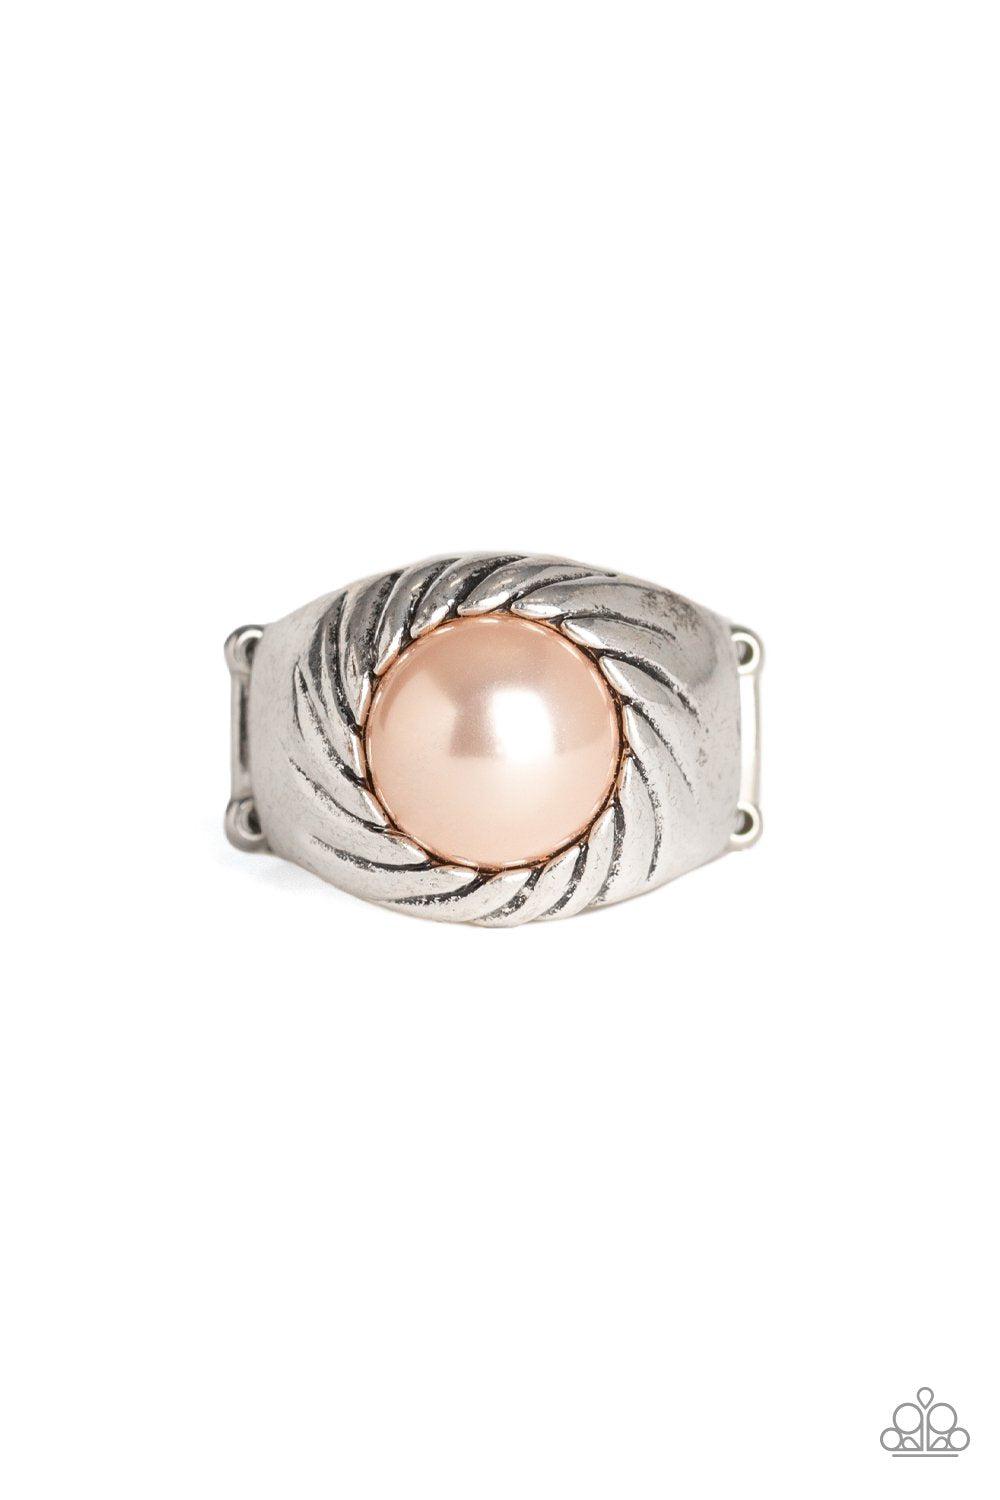 Wall Street Whimsical Silver and Brown Pearl Ring - Paparazzi Accessories-CarasShop.com - $5 Jewelry by Cara Jewels